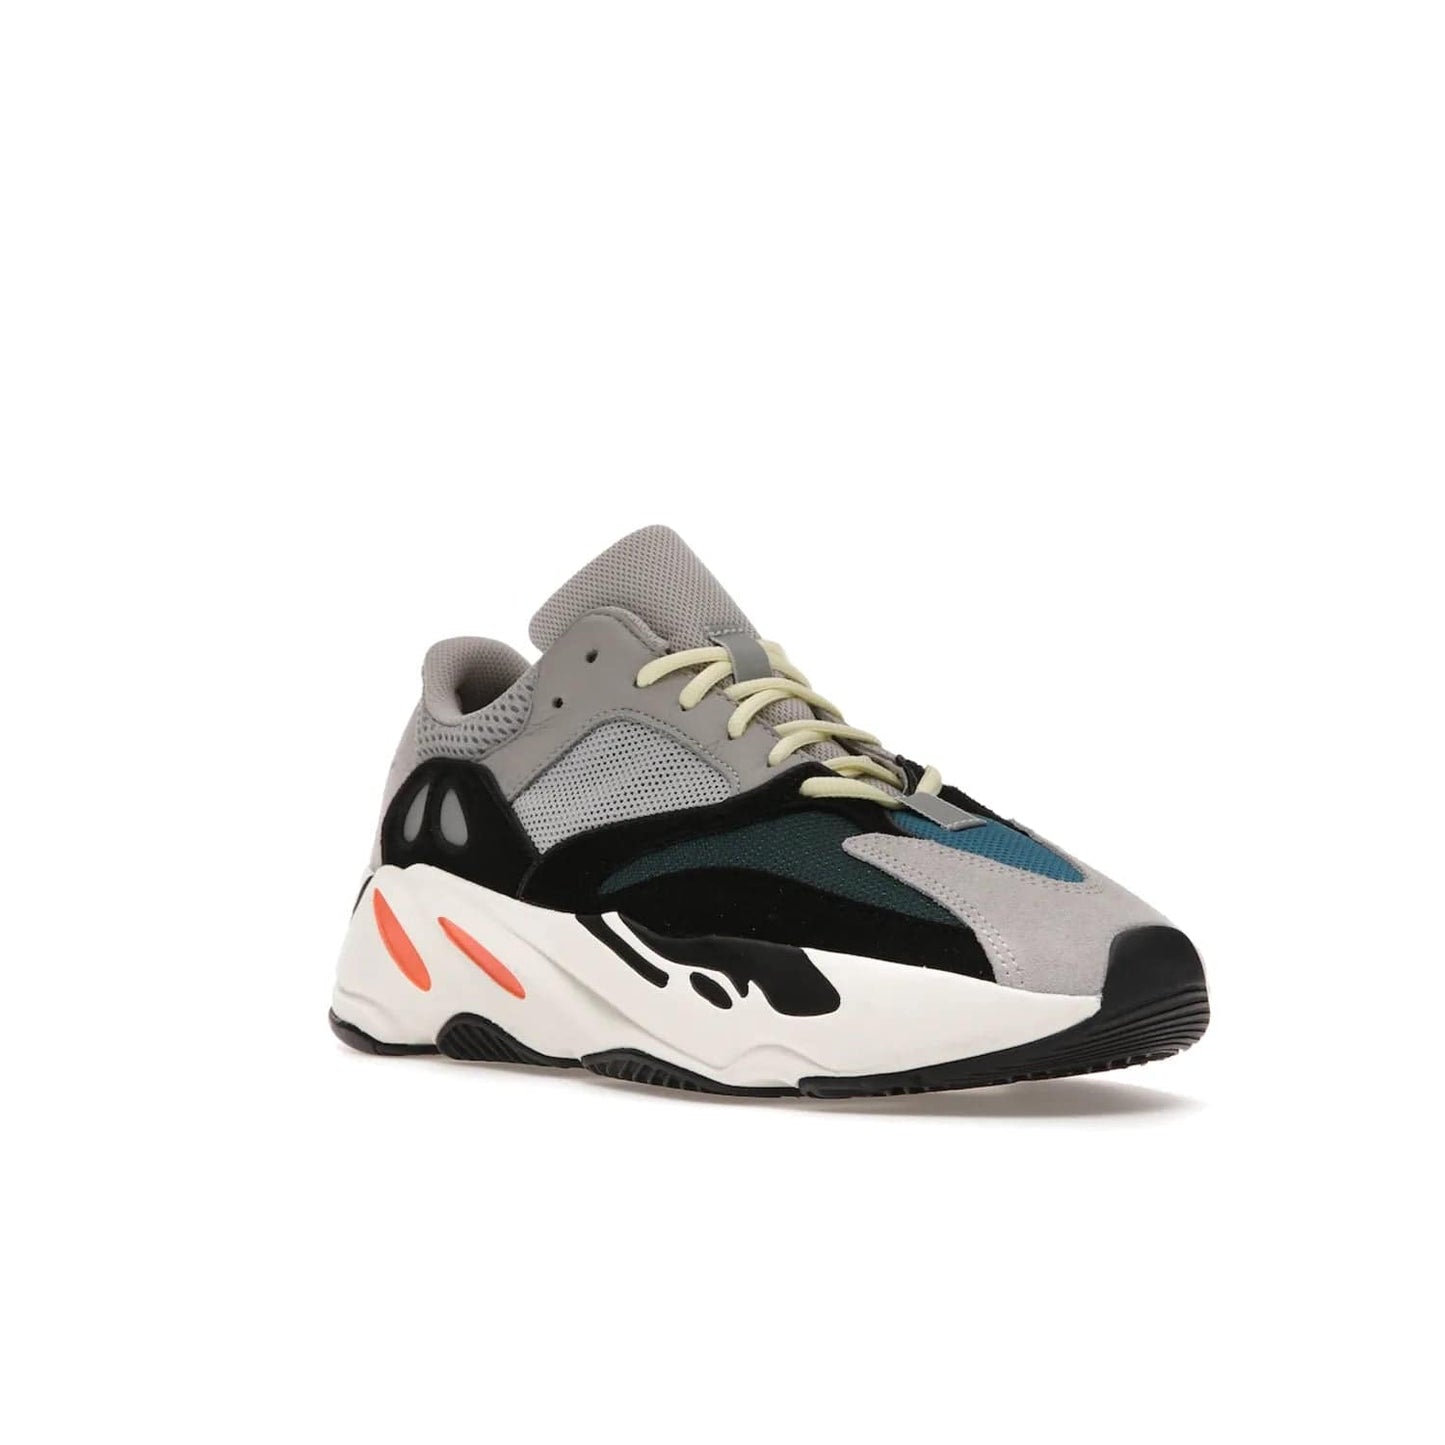 adidas Yeezy Boost 700 Wave Runner - Image 6 - Only at www.BallersClubKickz.com - Shop the iconic adidas Yeezy Boost 700 Wave Runner. Featuring grey mesh and leather upper, black suede overlays, teal mesh underlays, and signature Boost sole. Be bold & make a statement.